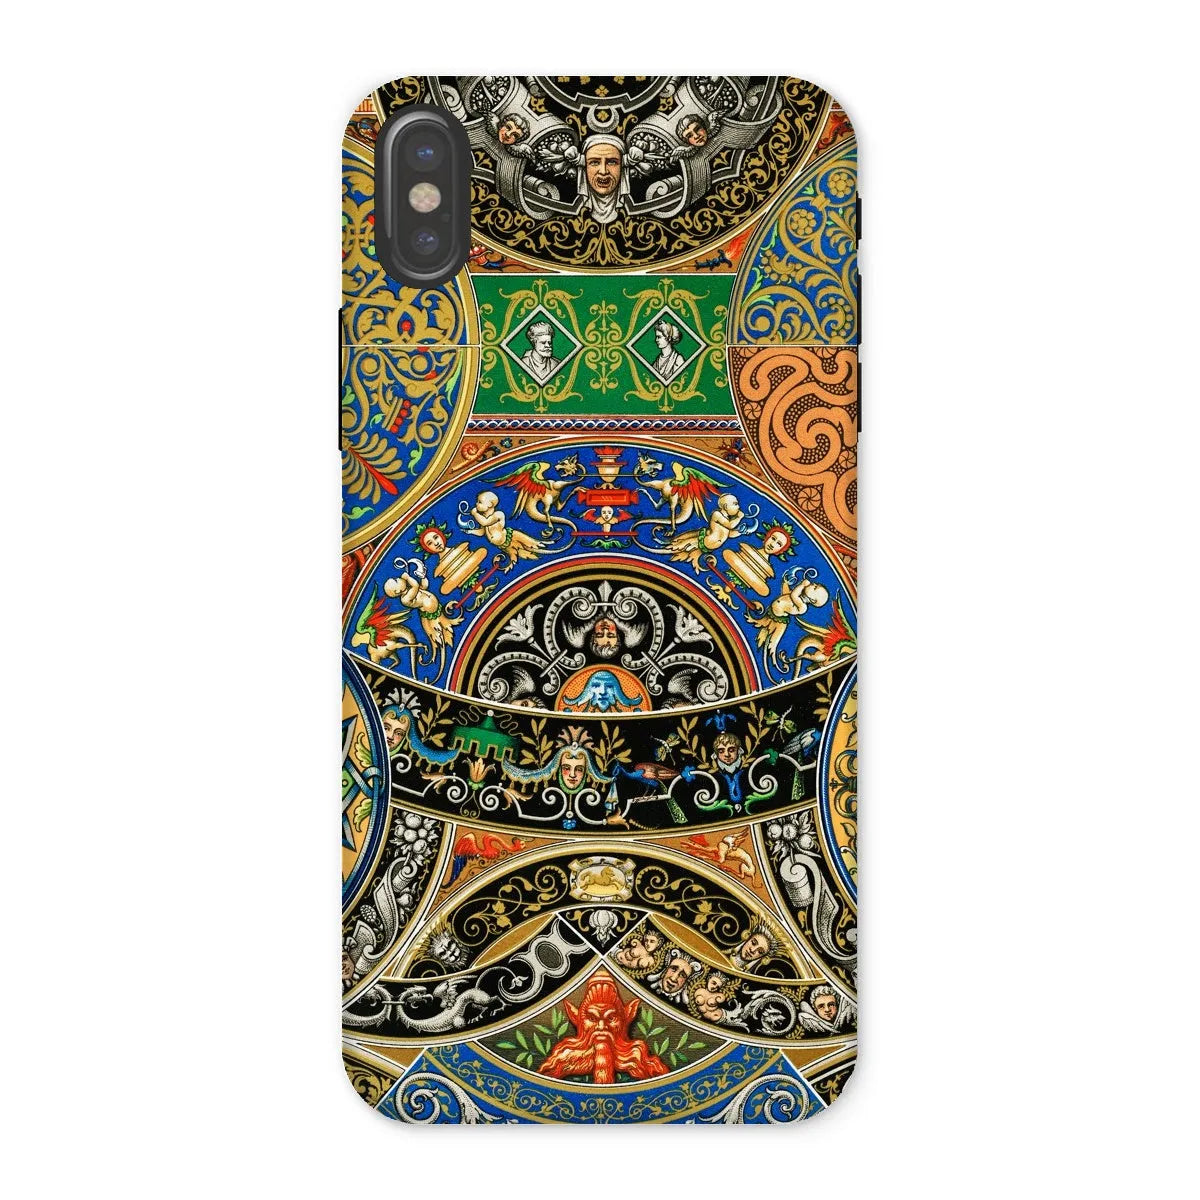 Renaissance Pattern 2 By Auguste Racinet Tough Phone Case - Iphone x / Gloss - Mobile Phone Cases - Aesthetic Art